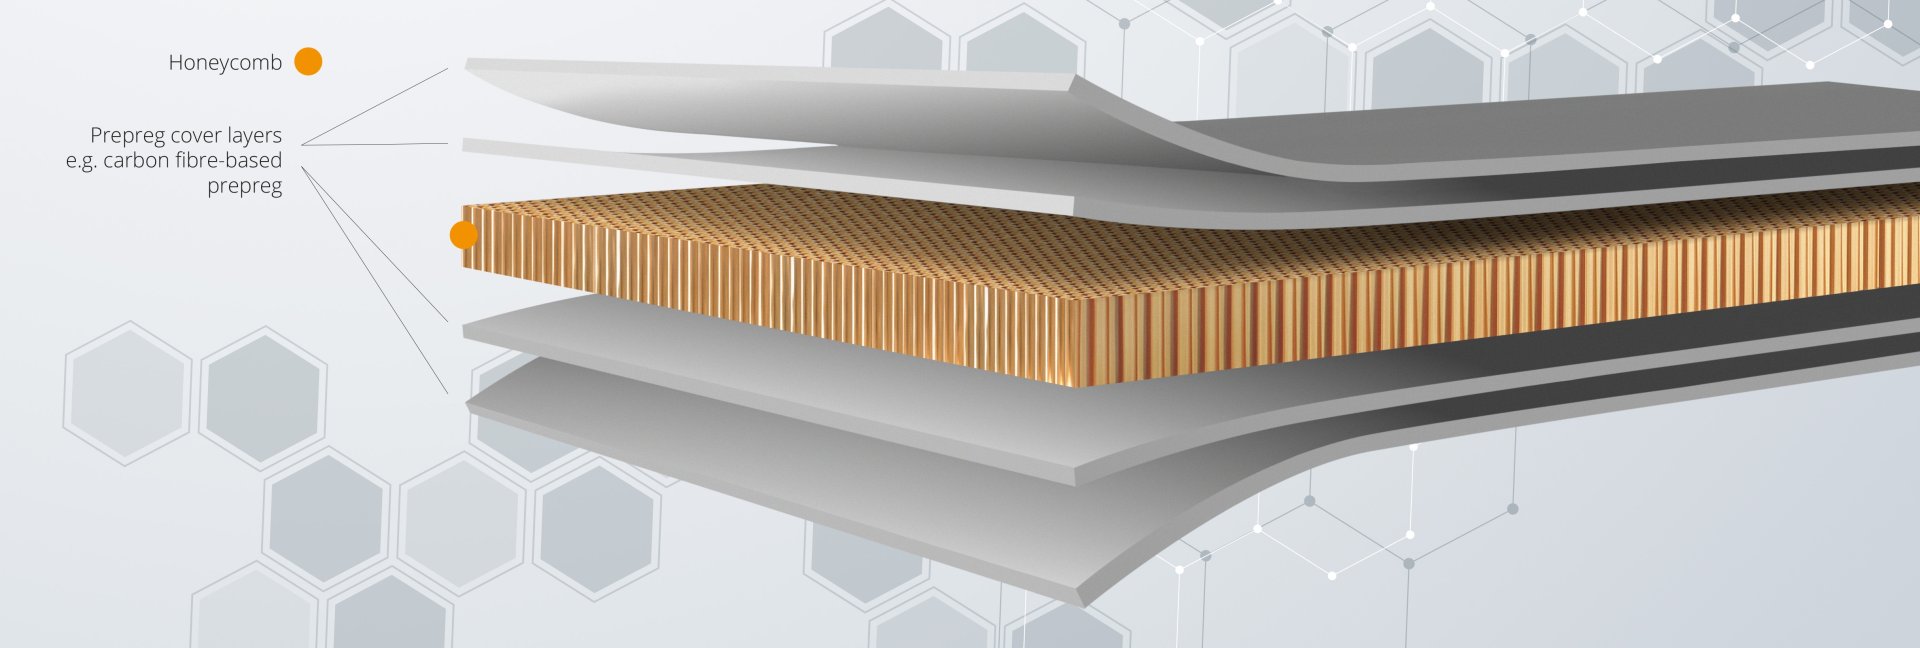 Sandwich panels with honeycomb core